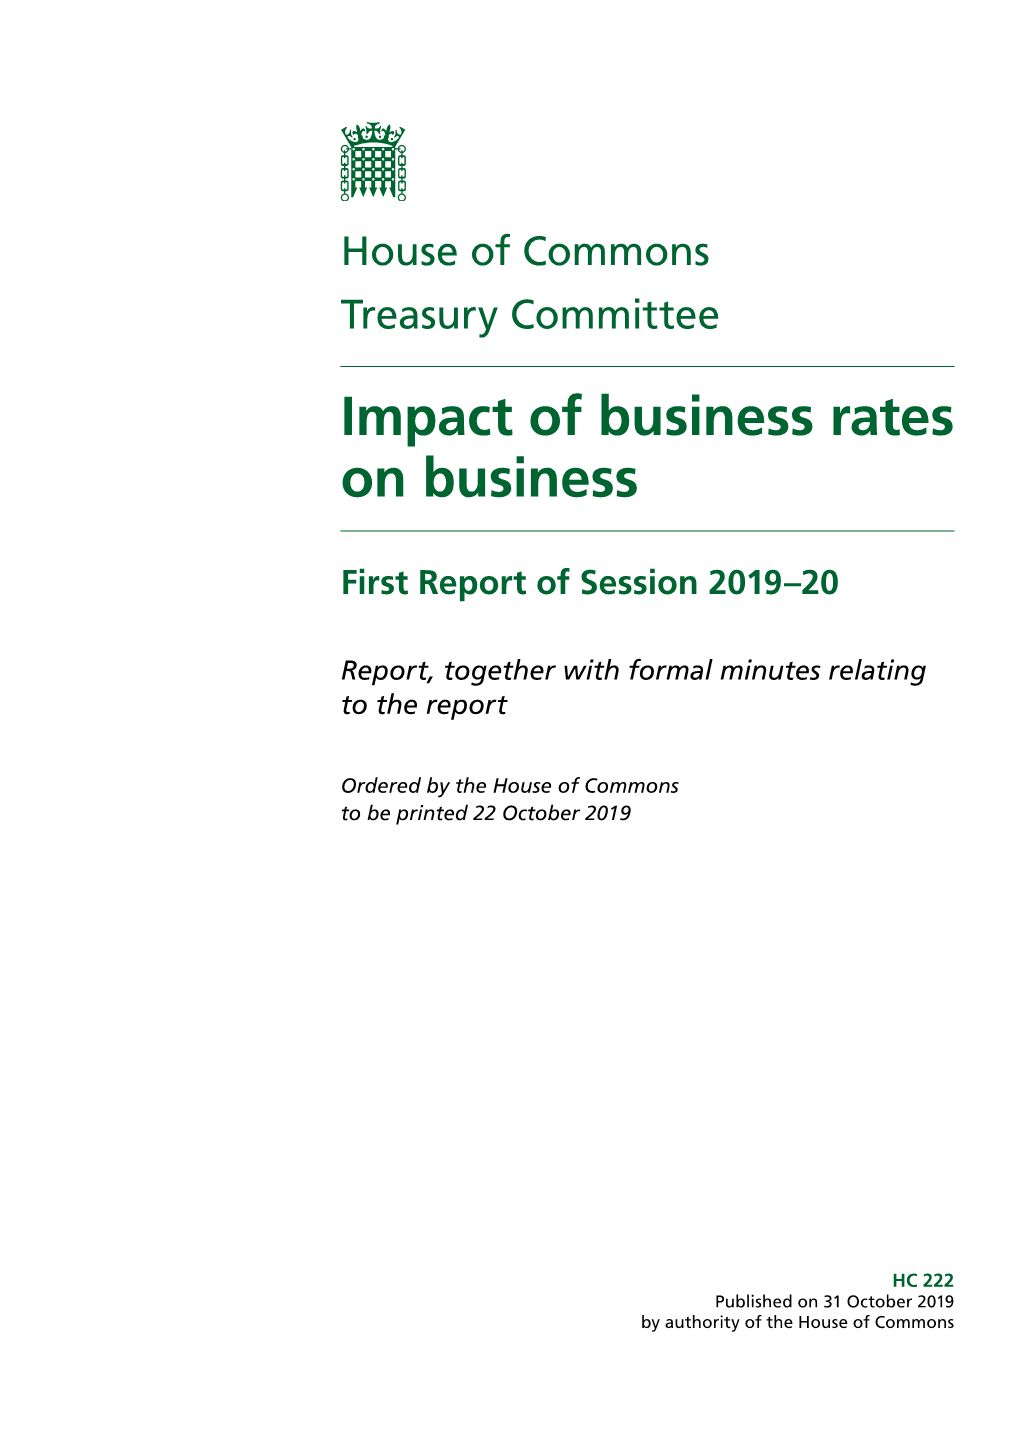 Impact of Business Rates on Business